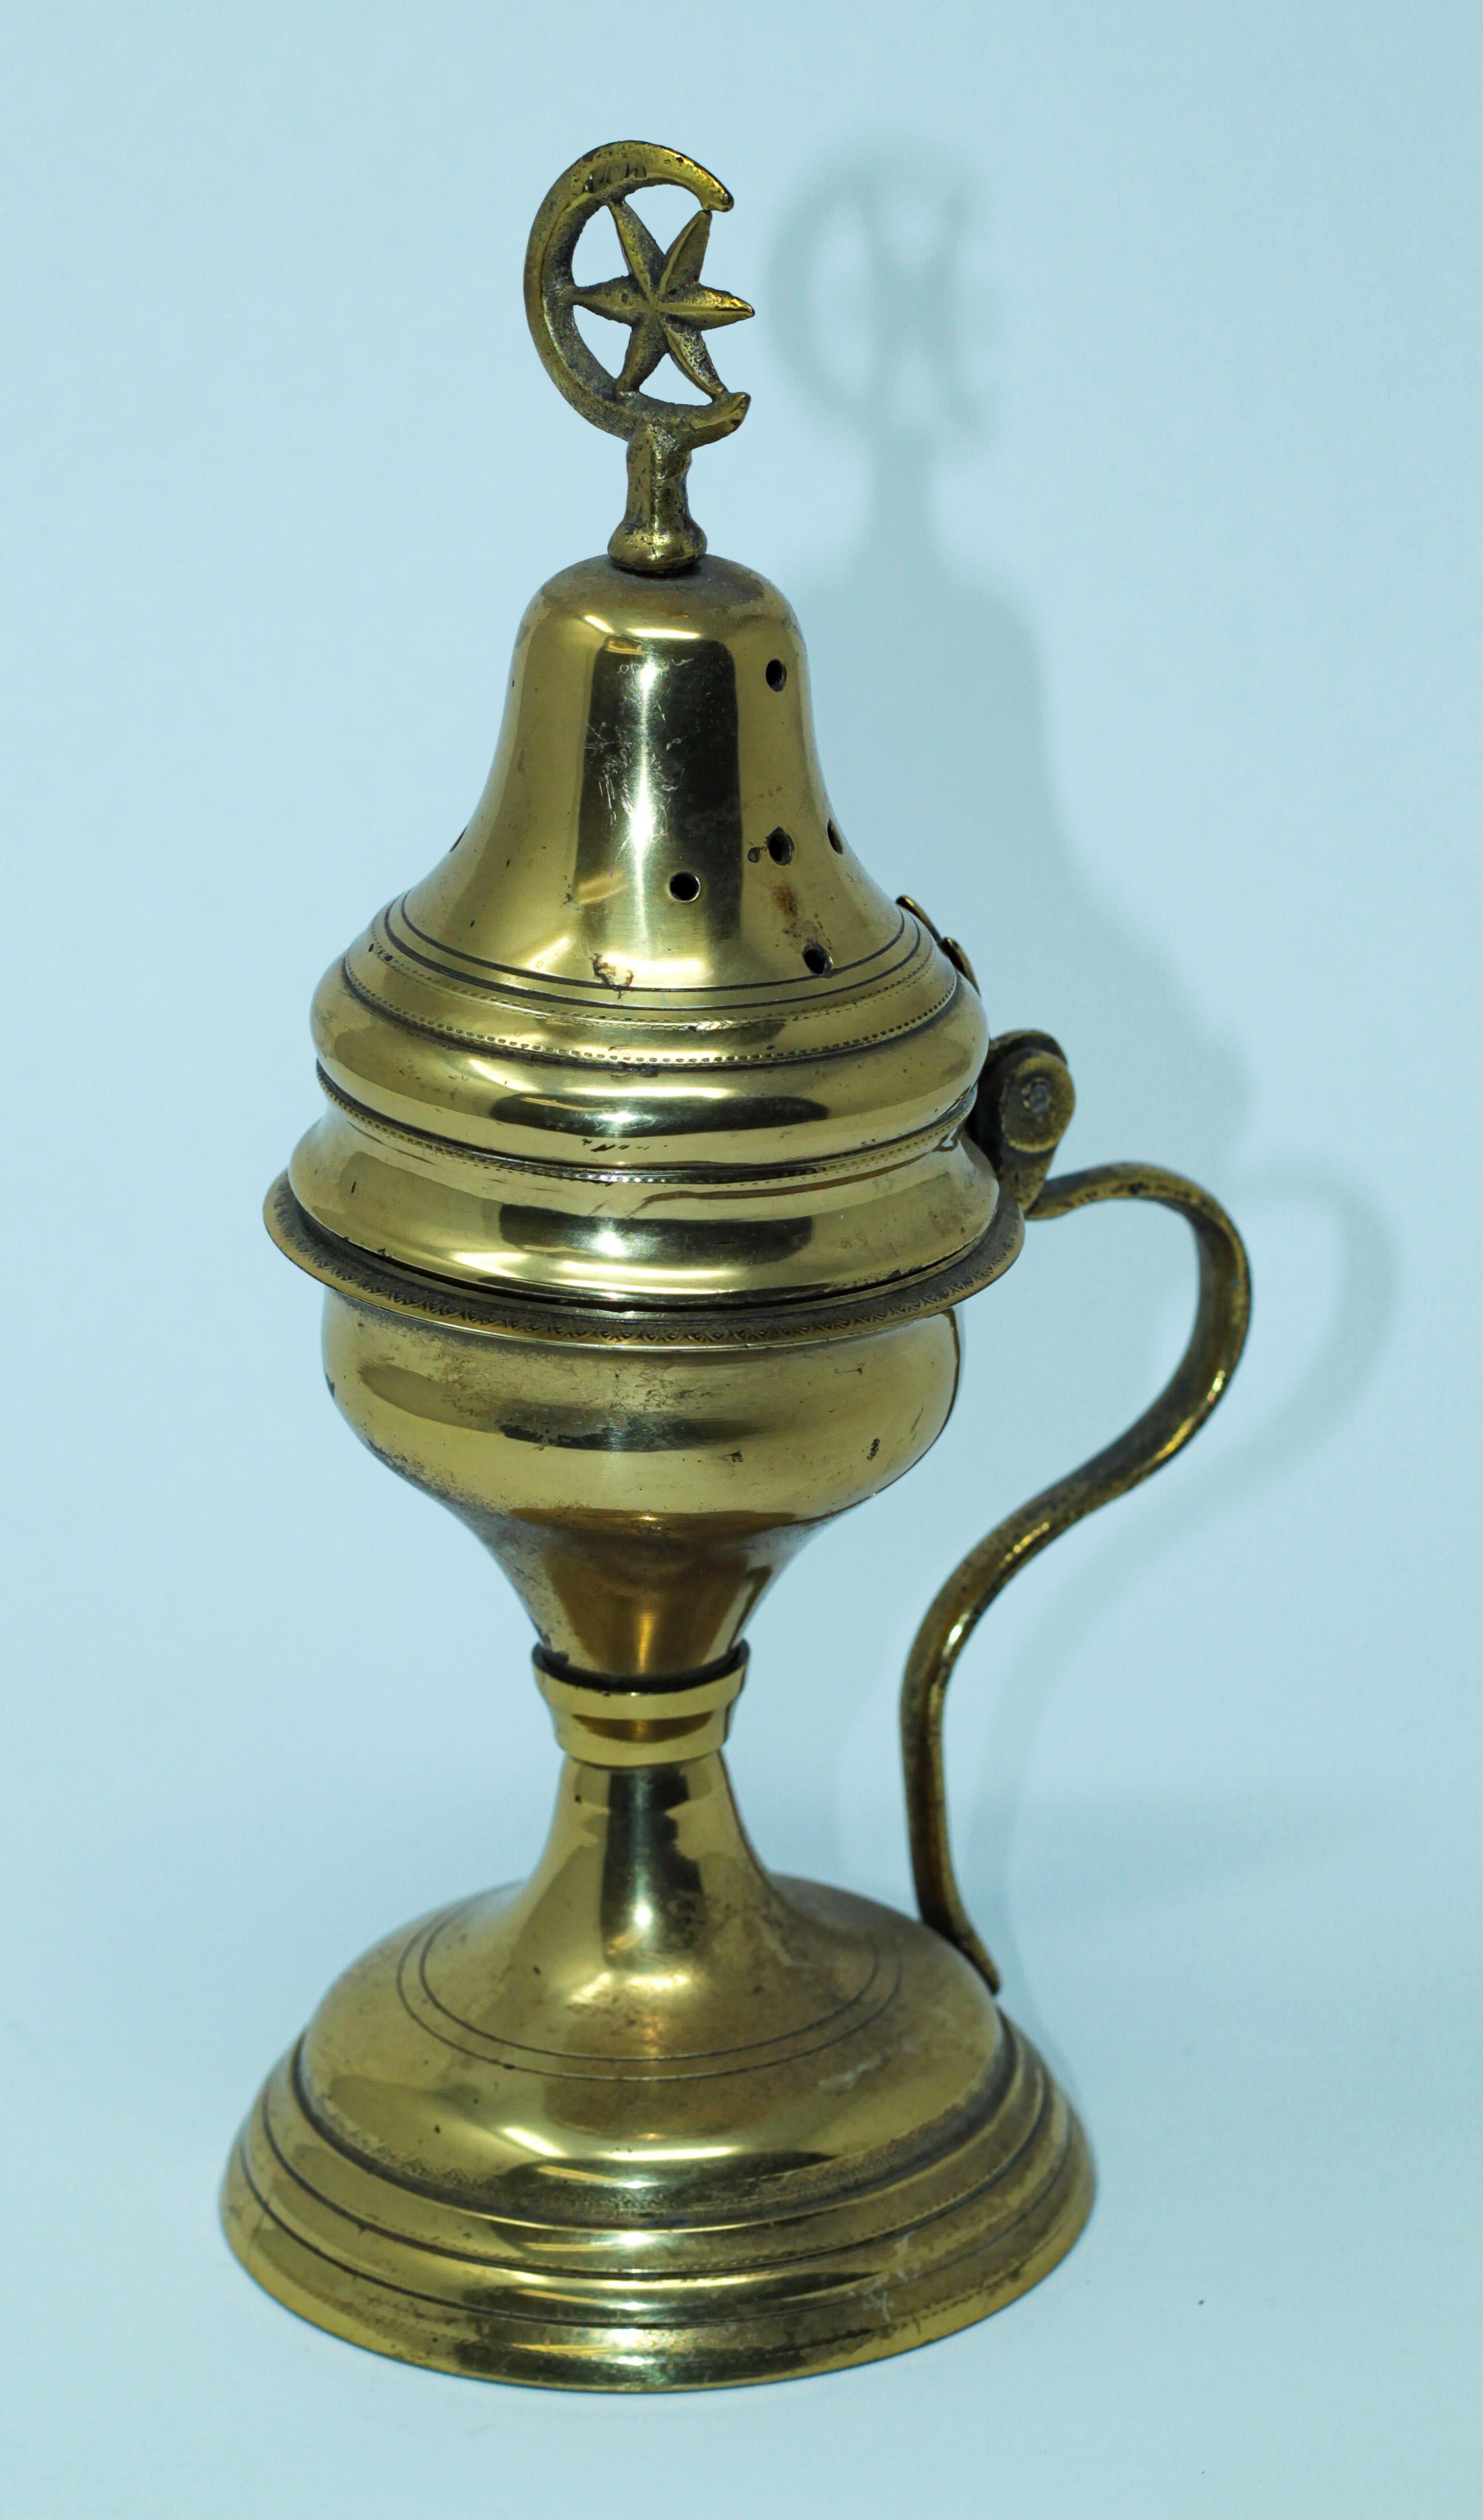 Footed antique Middle Eastern incense burner with pierced brass and solid brass ornamentation.
Decorated with a Crescent moon and star brass final.
Functional and beautifully adorned, complete with lid.
The copper bottom bowl was made to hold the